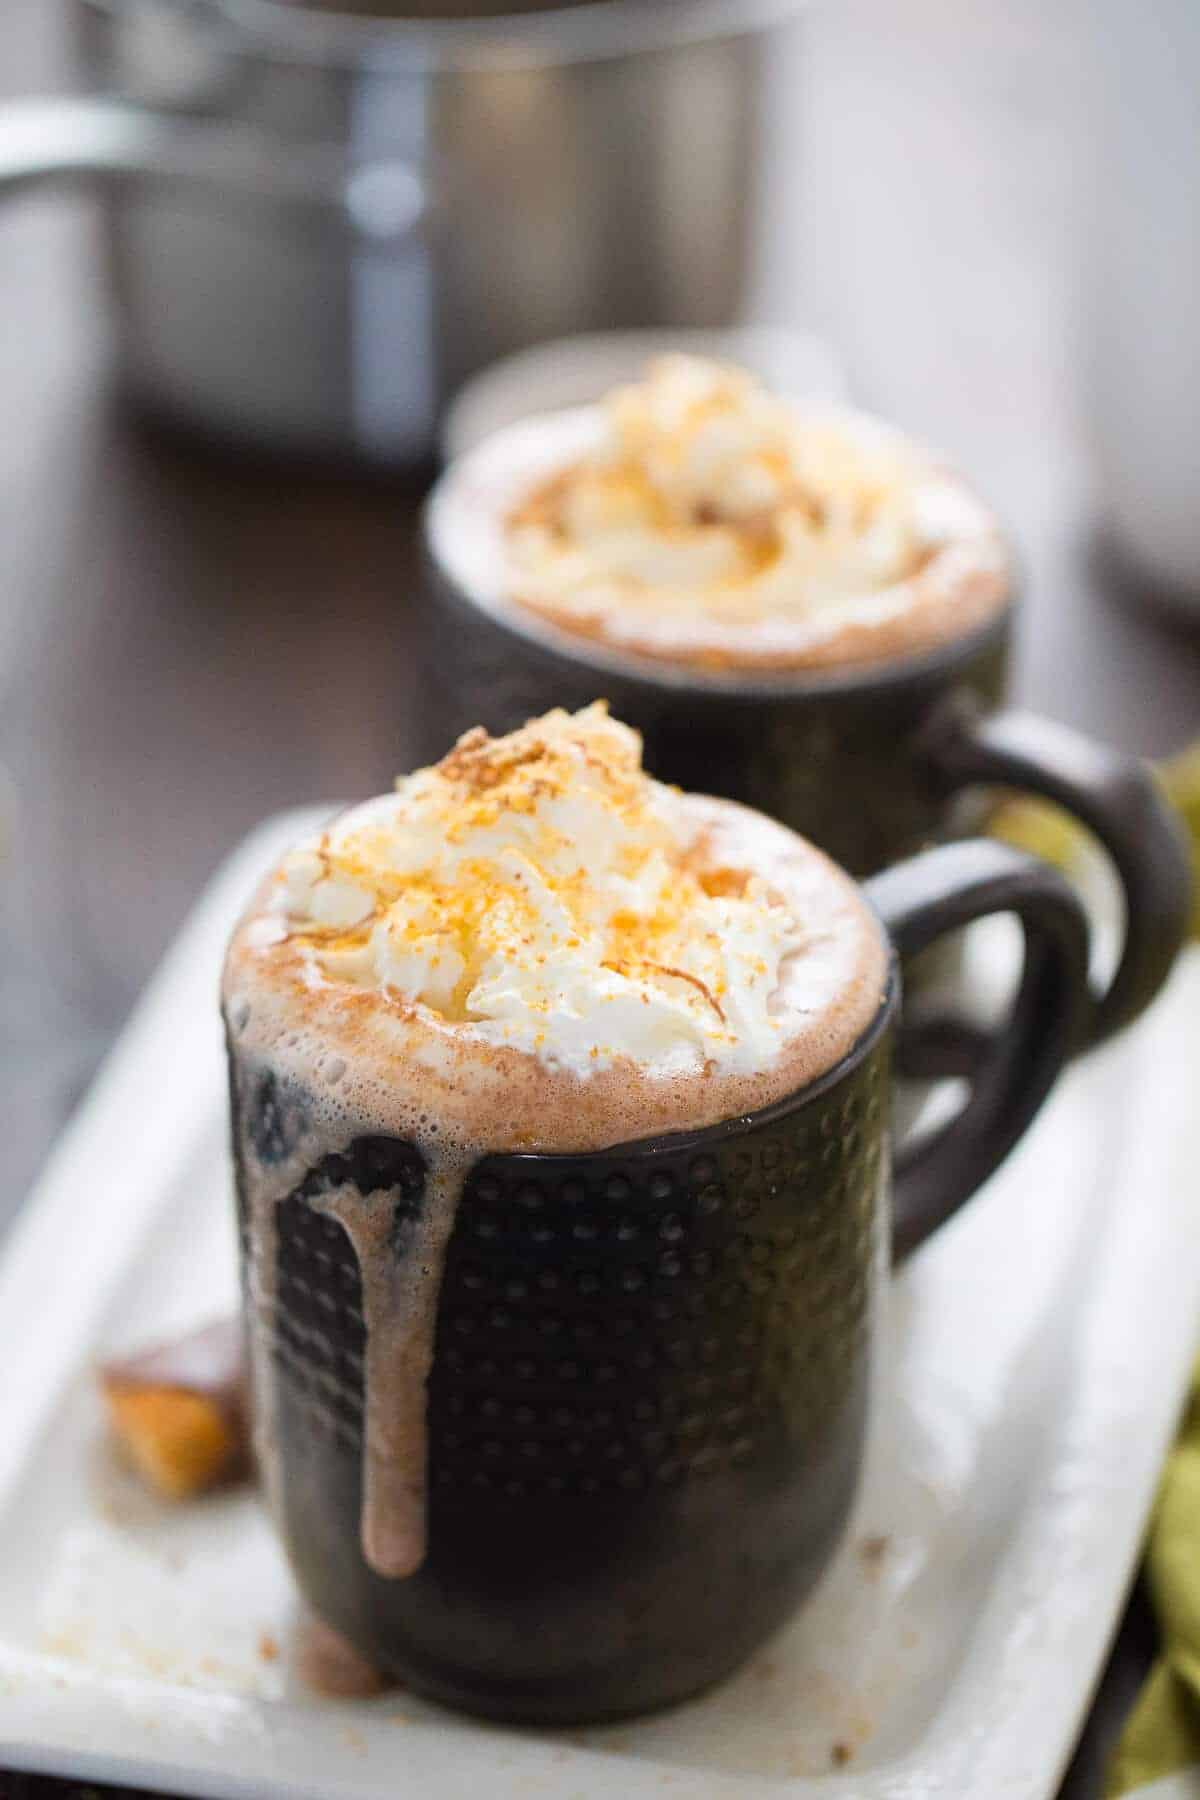 This hot cocoa recipe proves how simple it is to have rich tasting cocoa at home!